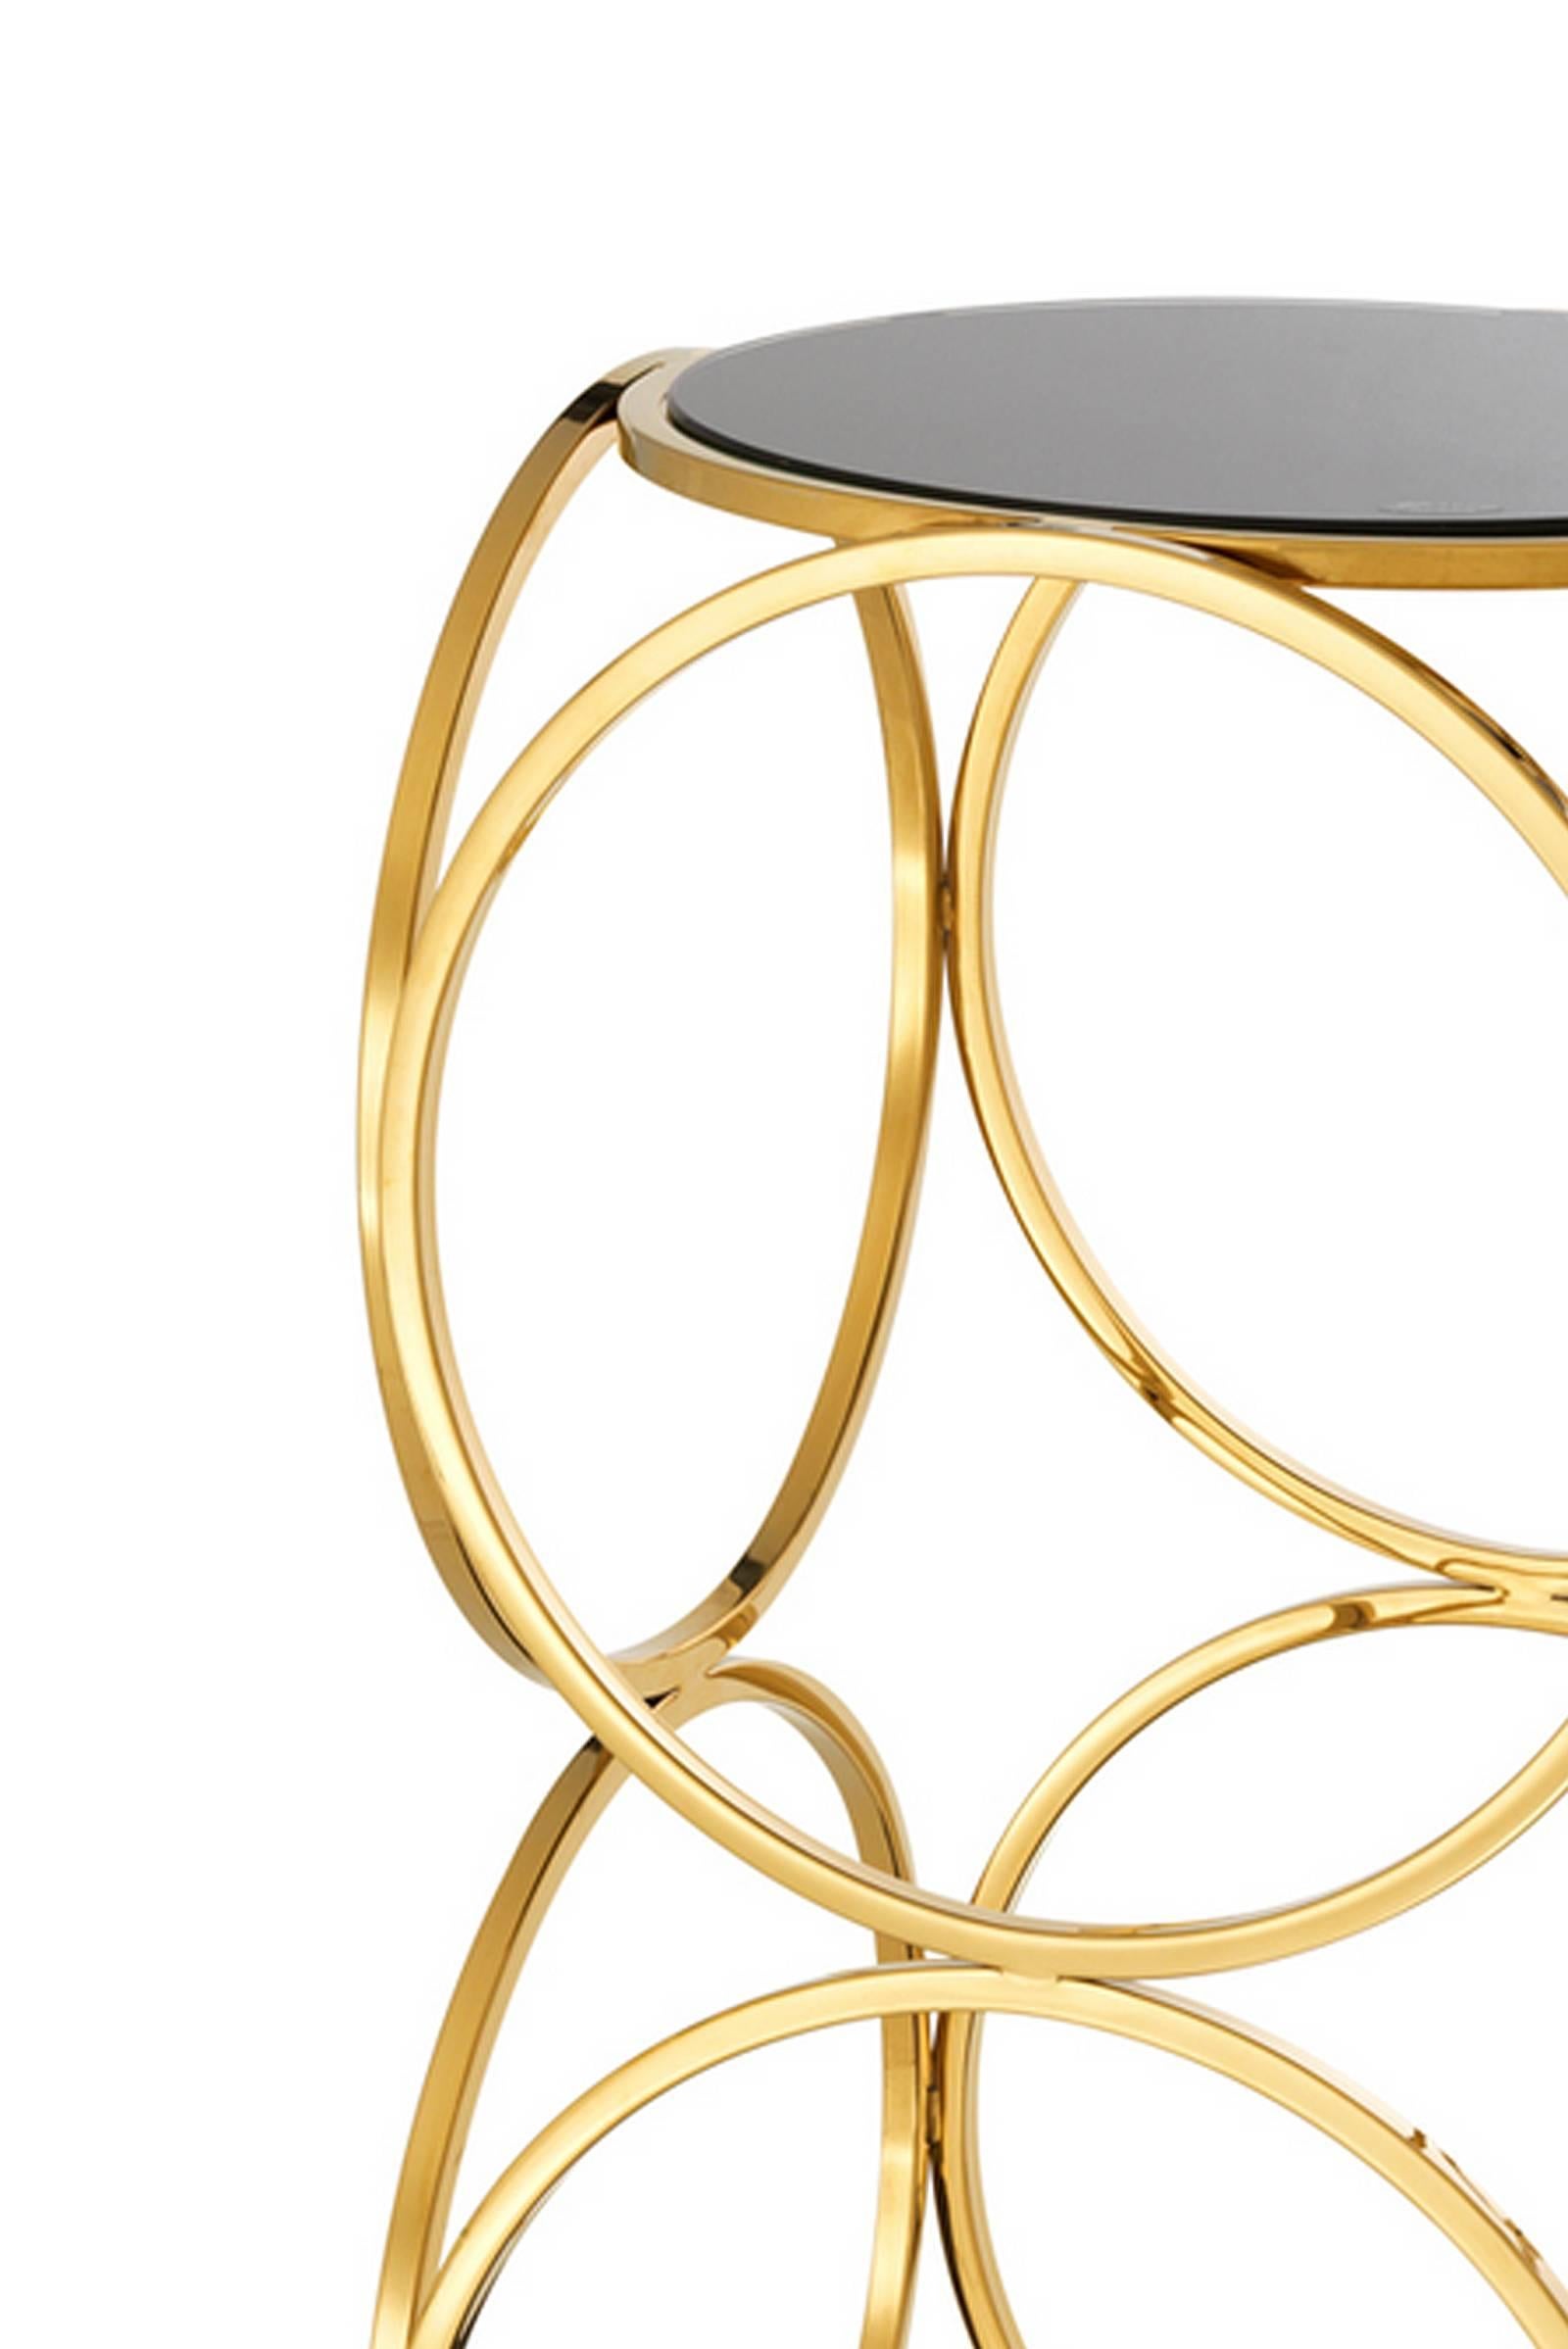 Side table rings in gold finish with black glass top and marble base.
Available in polished stainless steel, price: € 1550.00.
.